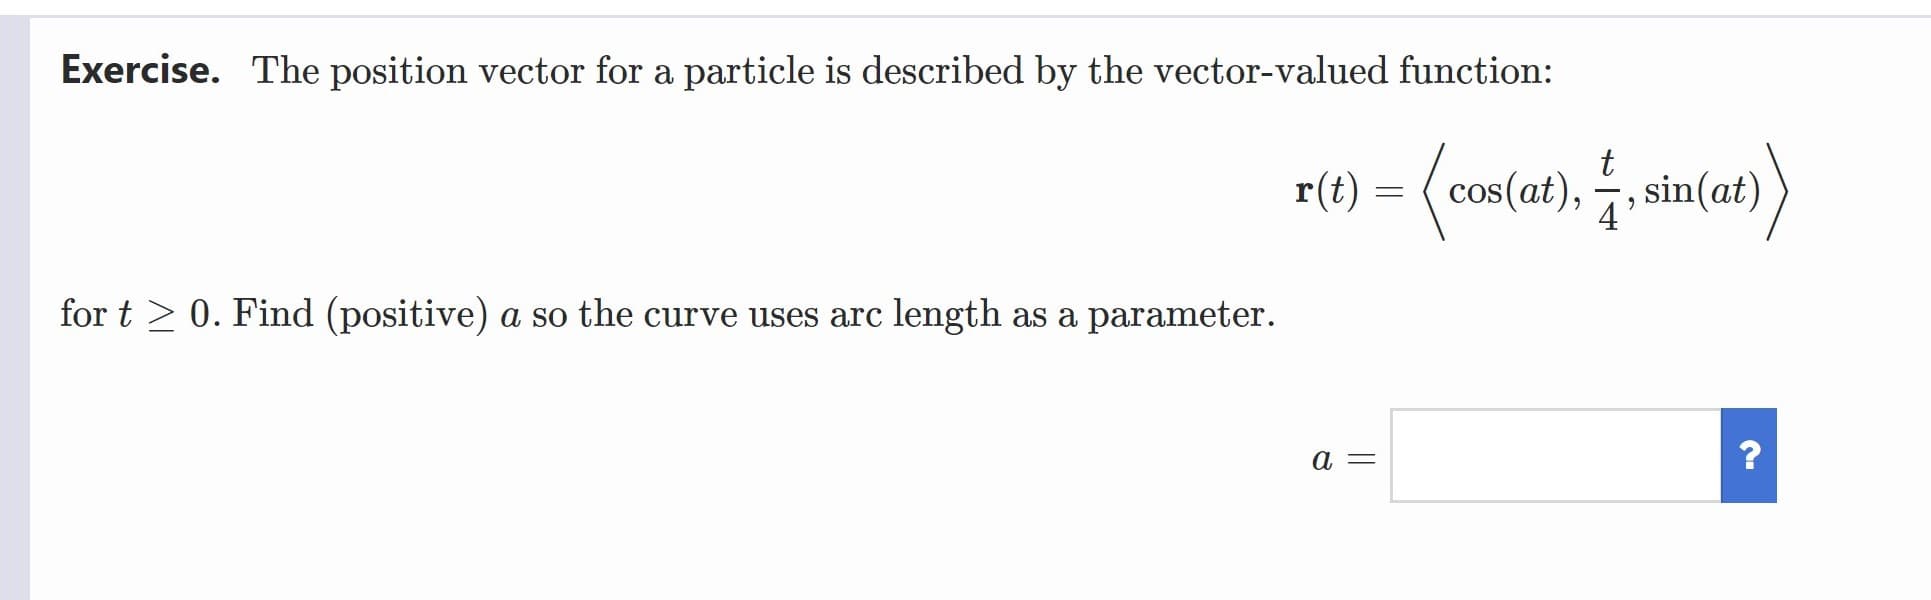 Exercise. The position vector for a particle is described by the vector-valued function:
sin(at)
r(t) =
cos(at),
for t > 0. Find (positive) a so the curve uses arc length as a parameter.
